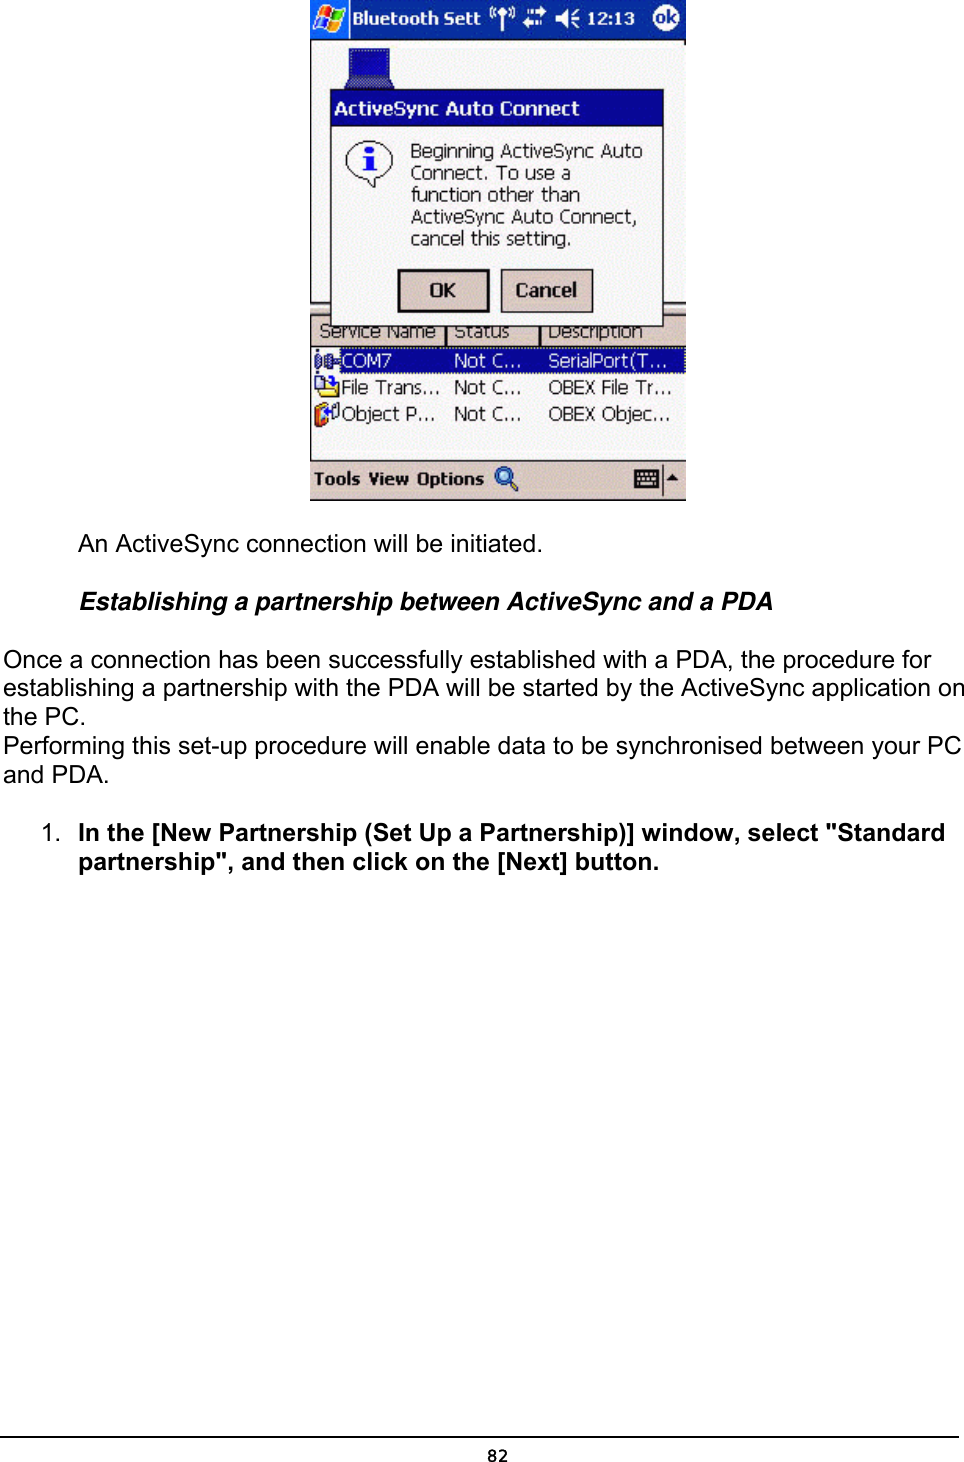   An ActiveSync connection will be initiated. Establishing a partnership between ActiveSync and a PDA Once a connection has been successfully established with a PDA, the procedure for establishing a partnership with the PDA will be started by the ActiveSync application on the PC. Performing this set-up procedure will enable data to be synchronised between your PC and PDA. 1.  In the [New Partnership (Set Up a Partnership)] window, select &quot;Standard partnership&quot;, and then click on the [Next] button.  82